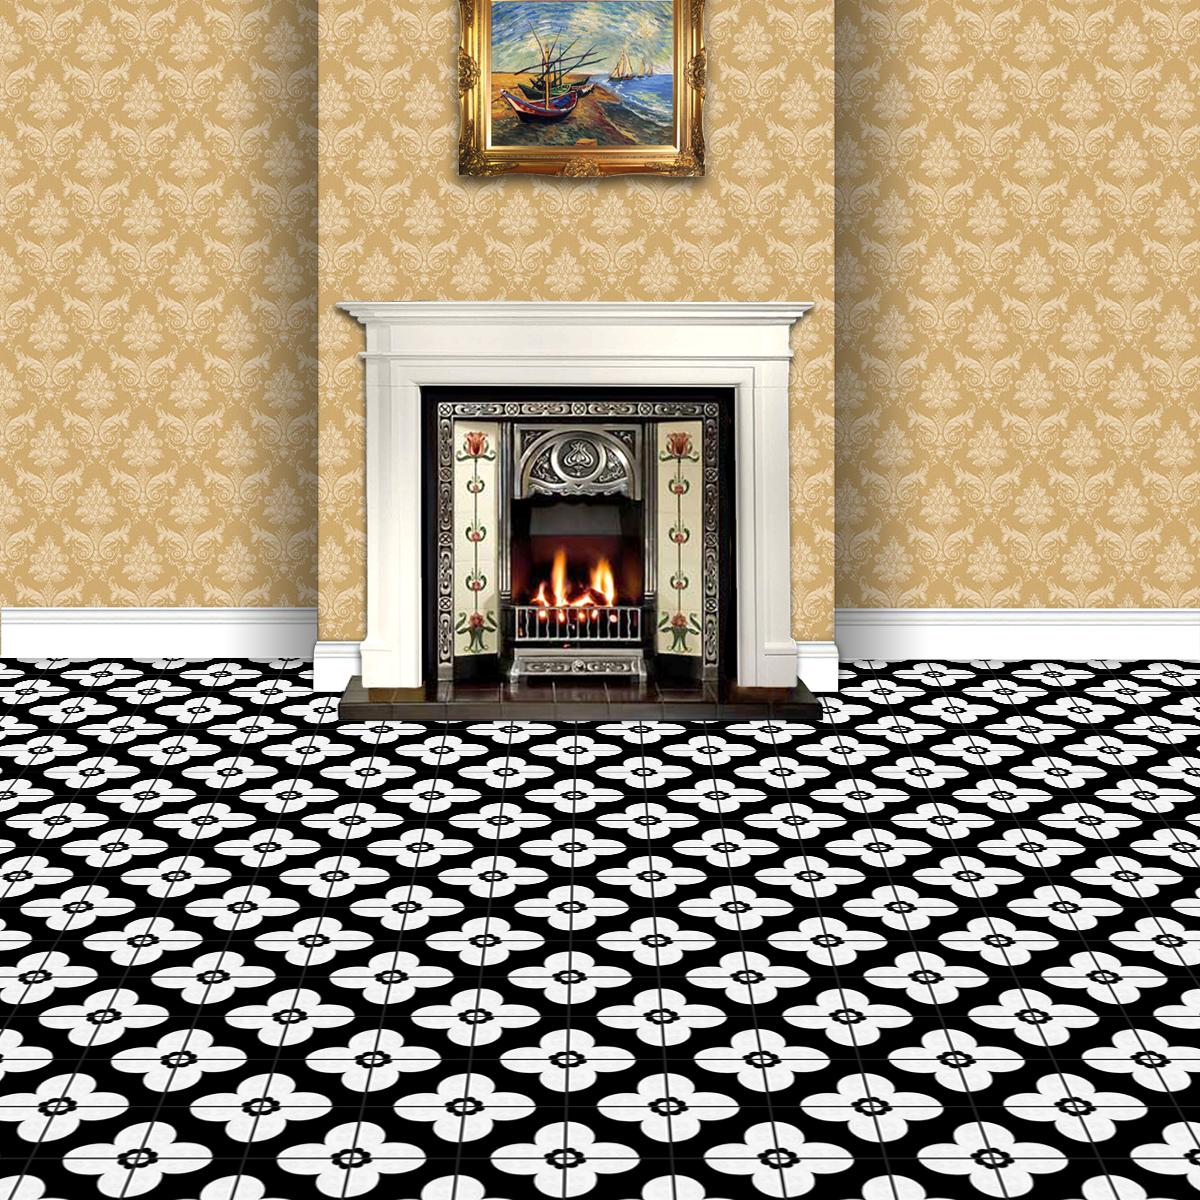 1:24th White Flower Design Tile Sheet With Black Grout 